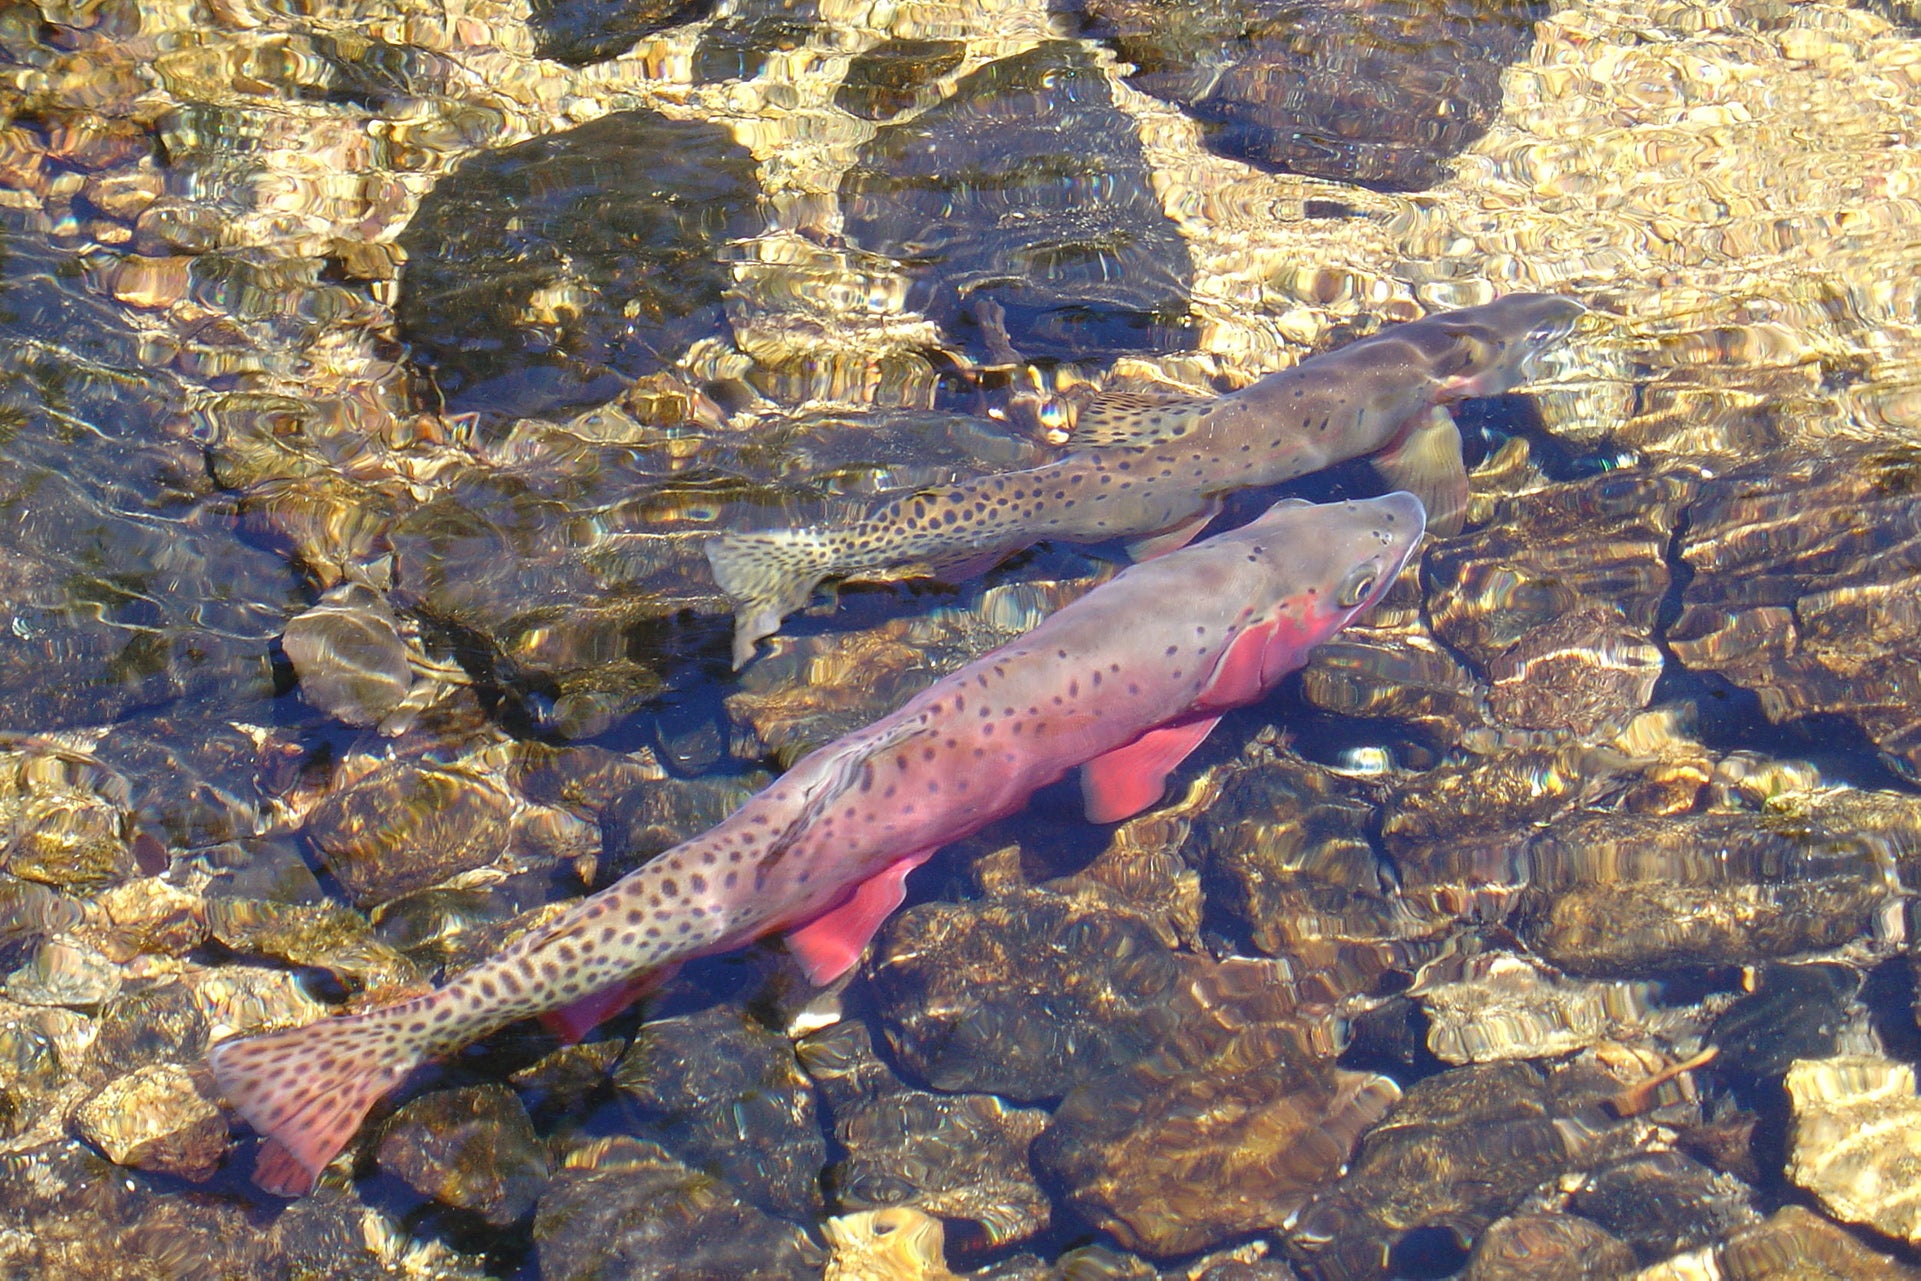 Greenback Cutthroat Trout Restoration Project Will Receive 11% of Retailer's Revenues